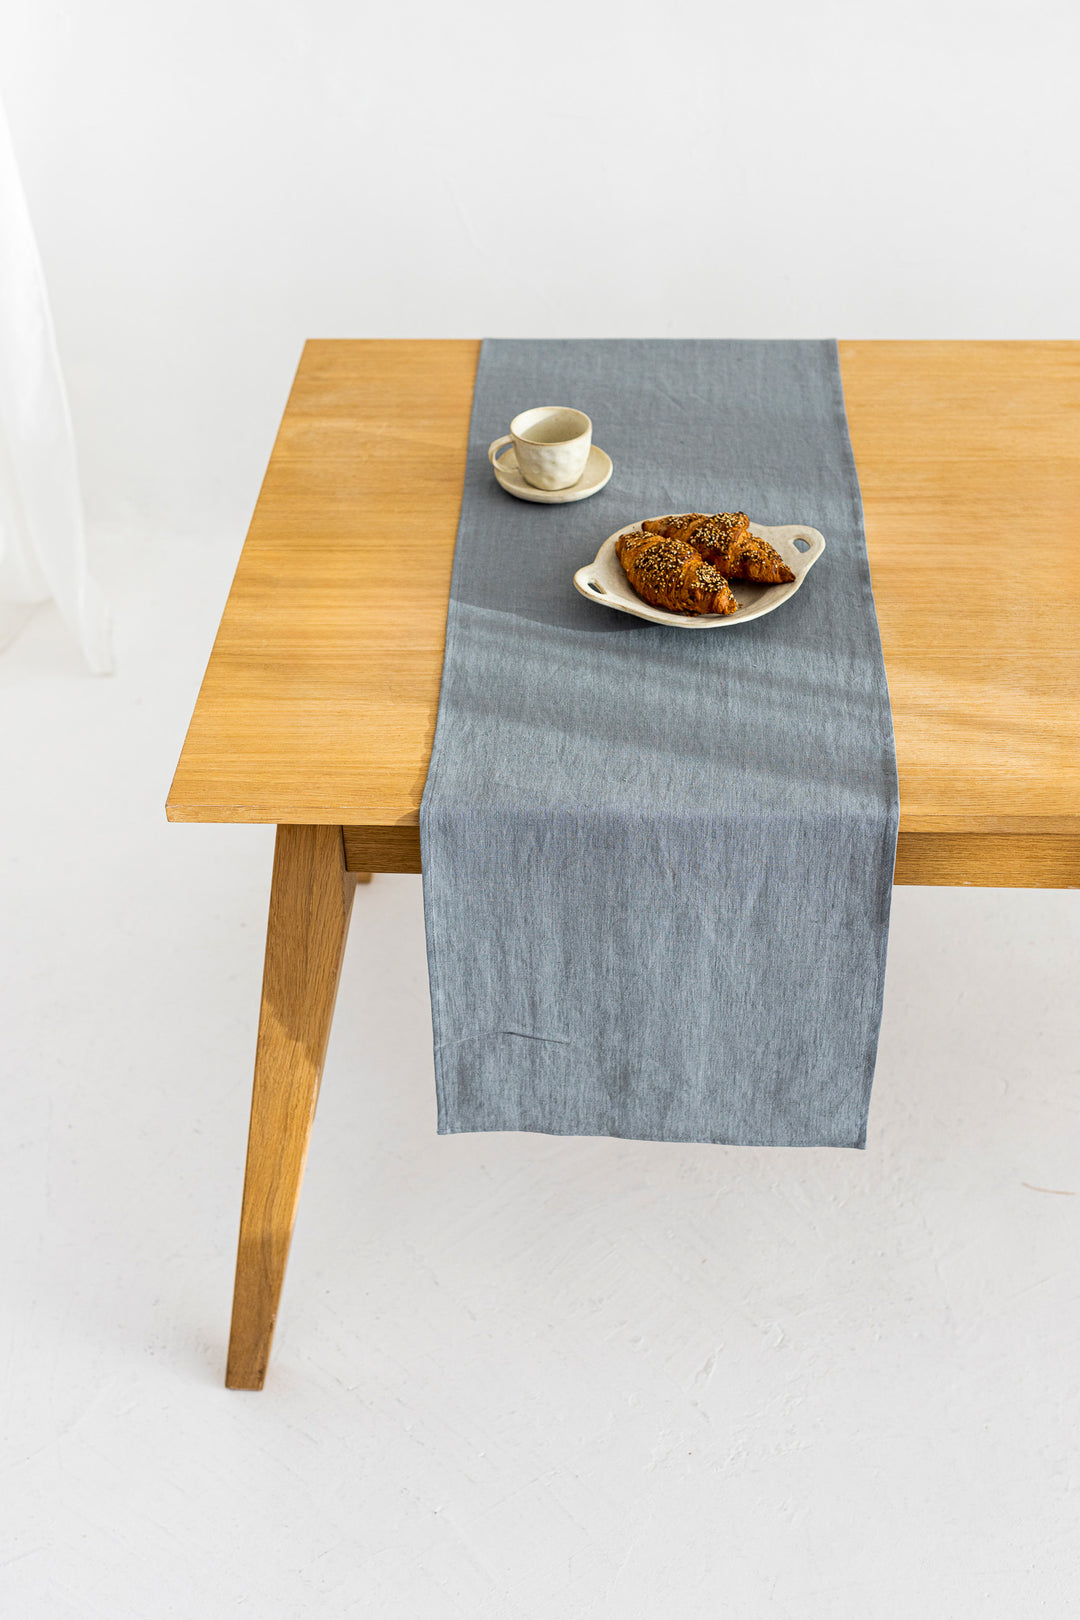 Linen Table Runner On Table In Grey Color - Daily Linen